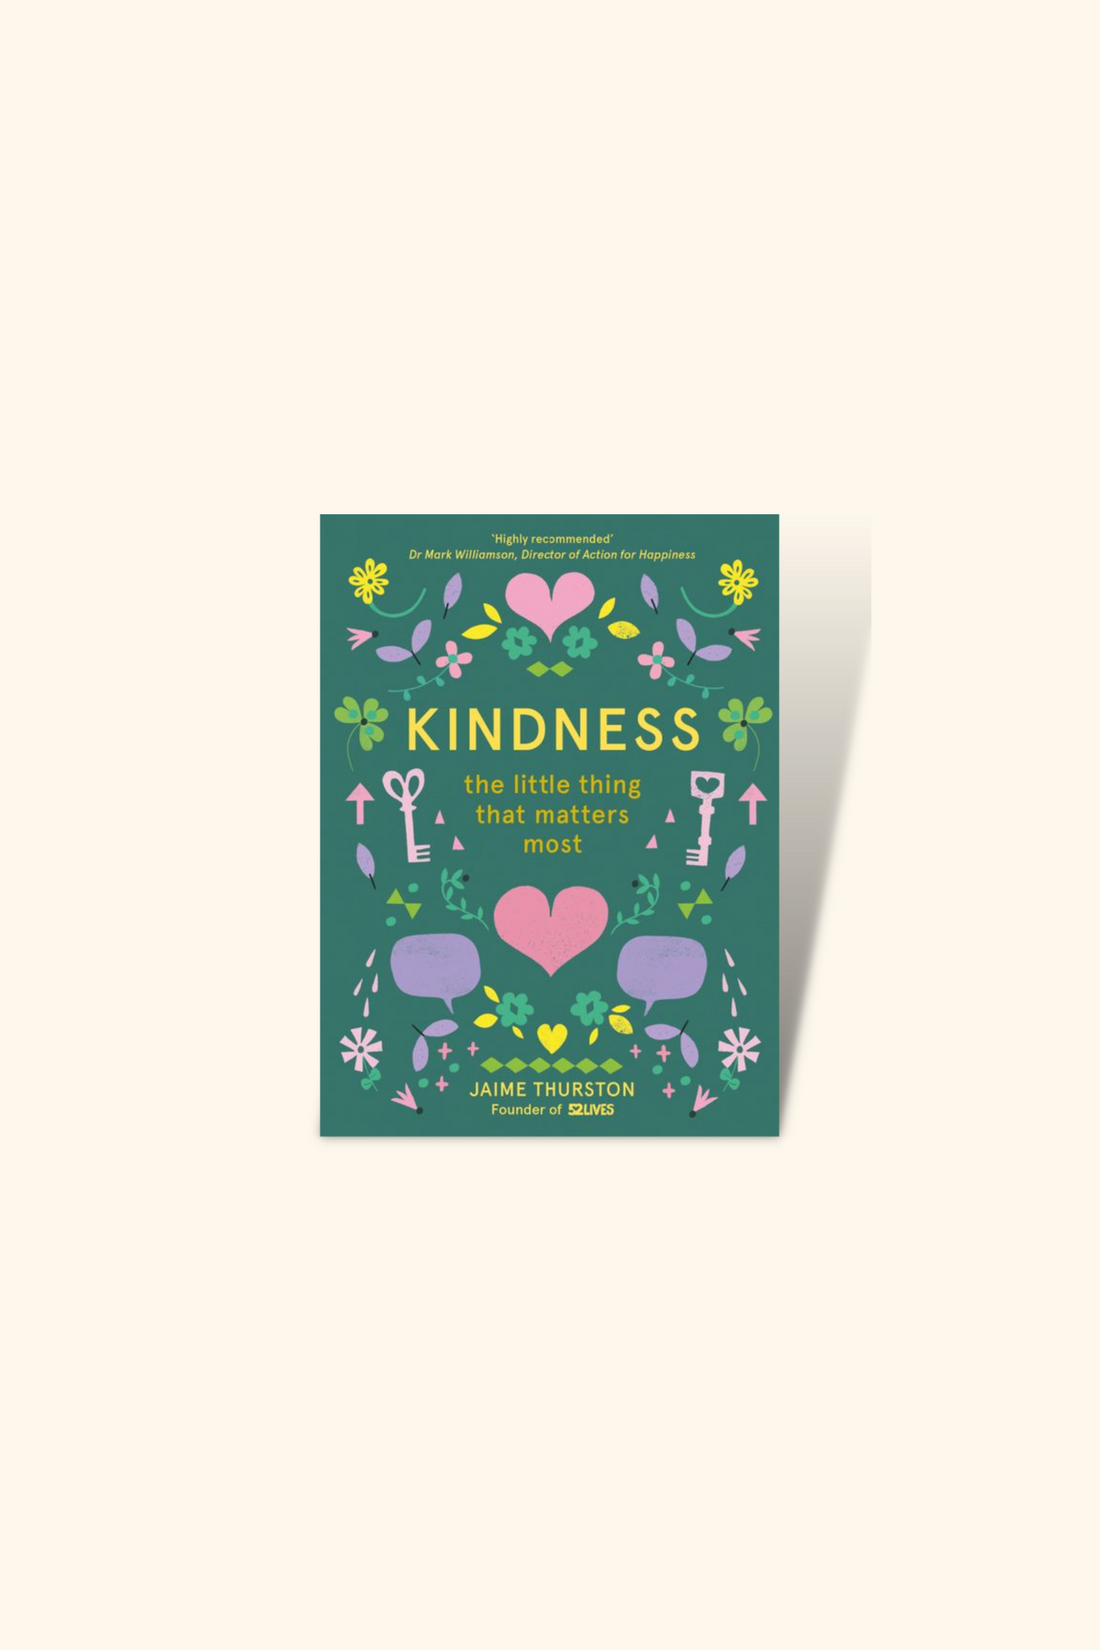 KINDNESS - THE LITTLE THING THAT MATTERS MOST